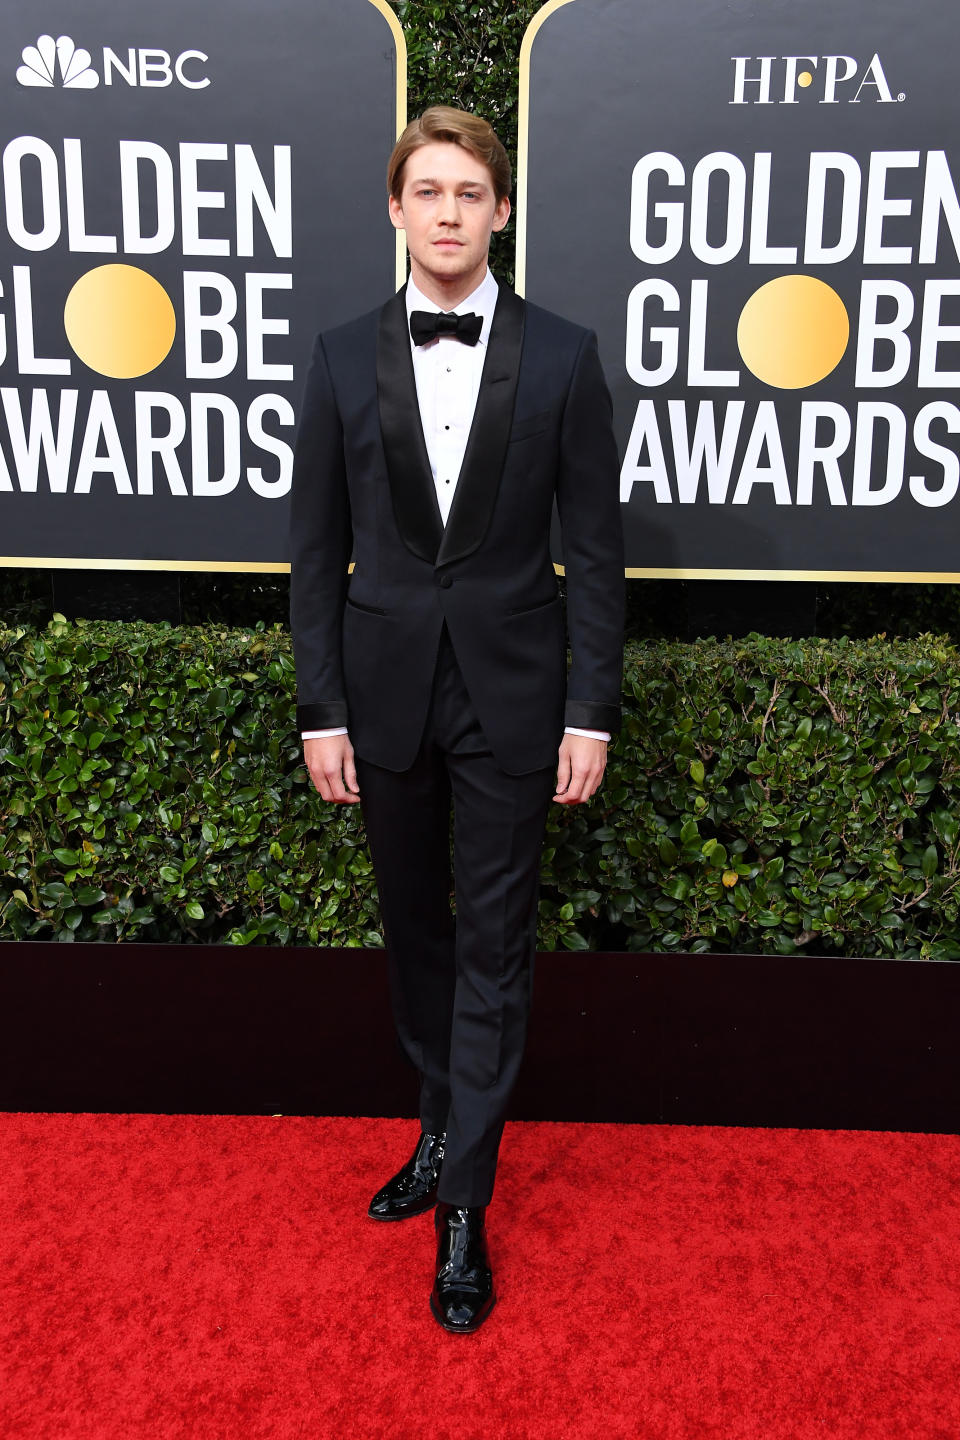 BEVERLY HILLS, CALIFORNIA - JANUARY 05: Joe Alwyn attends the 77th Annual Golden Globe Awards at The Beverly Hilton Hotel on January 05, 2020 in Beverly Hills, California. (Photo by Steve Granitz/WireImage)